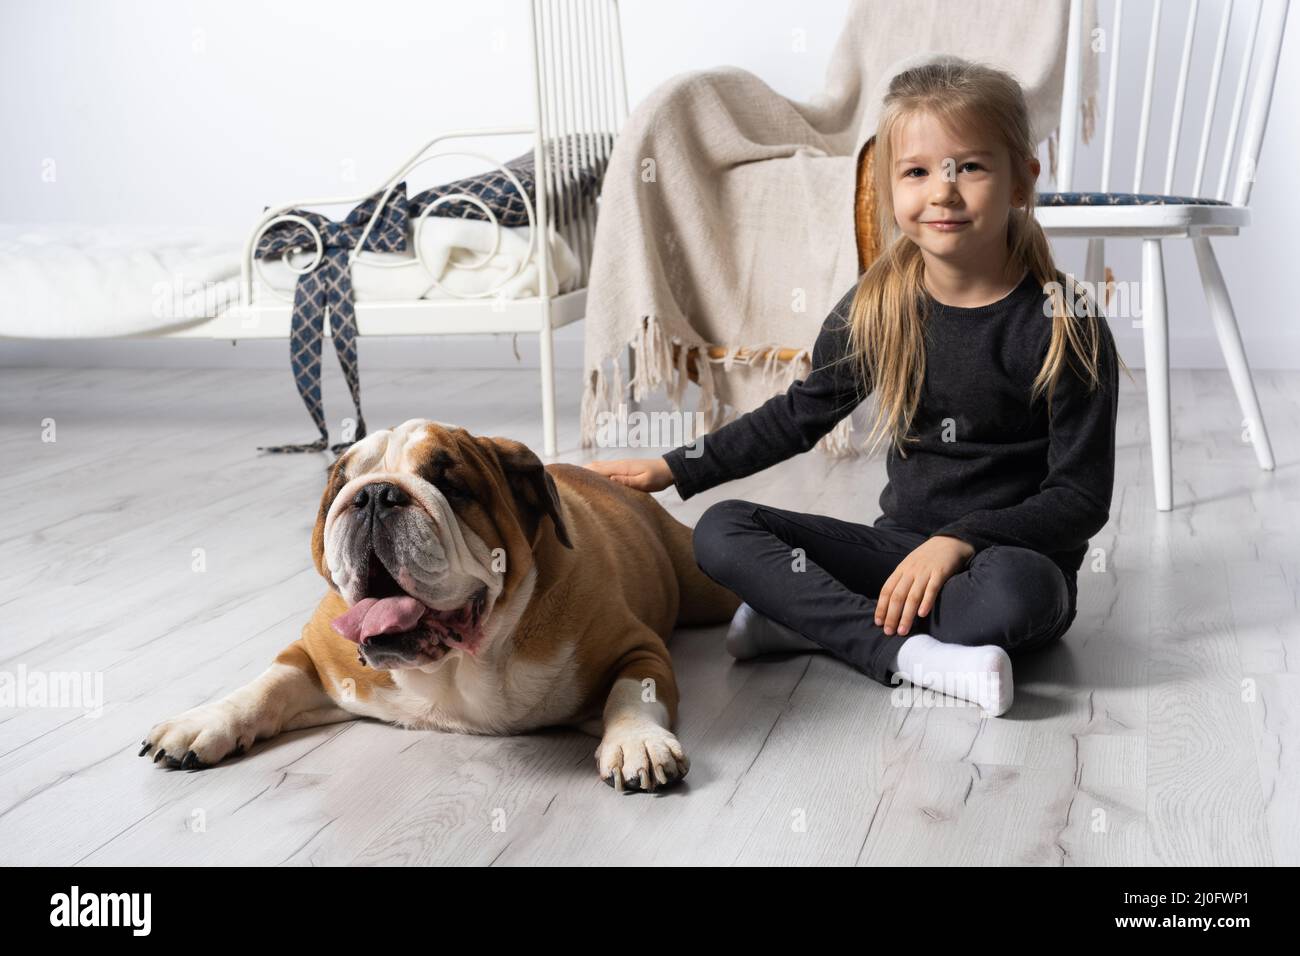 The girl is sitting on the floor next to the English Bulldog's belt and is gently stroking it with her hand. Man and dog. Stock Photo